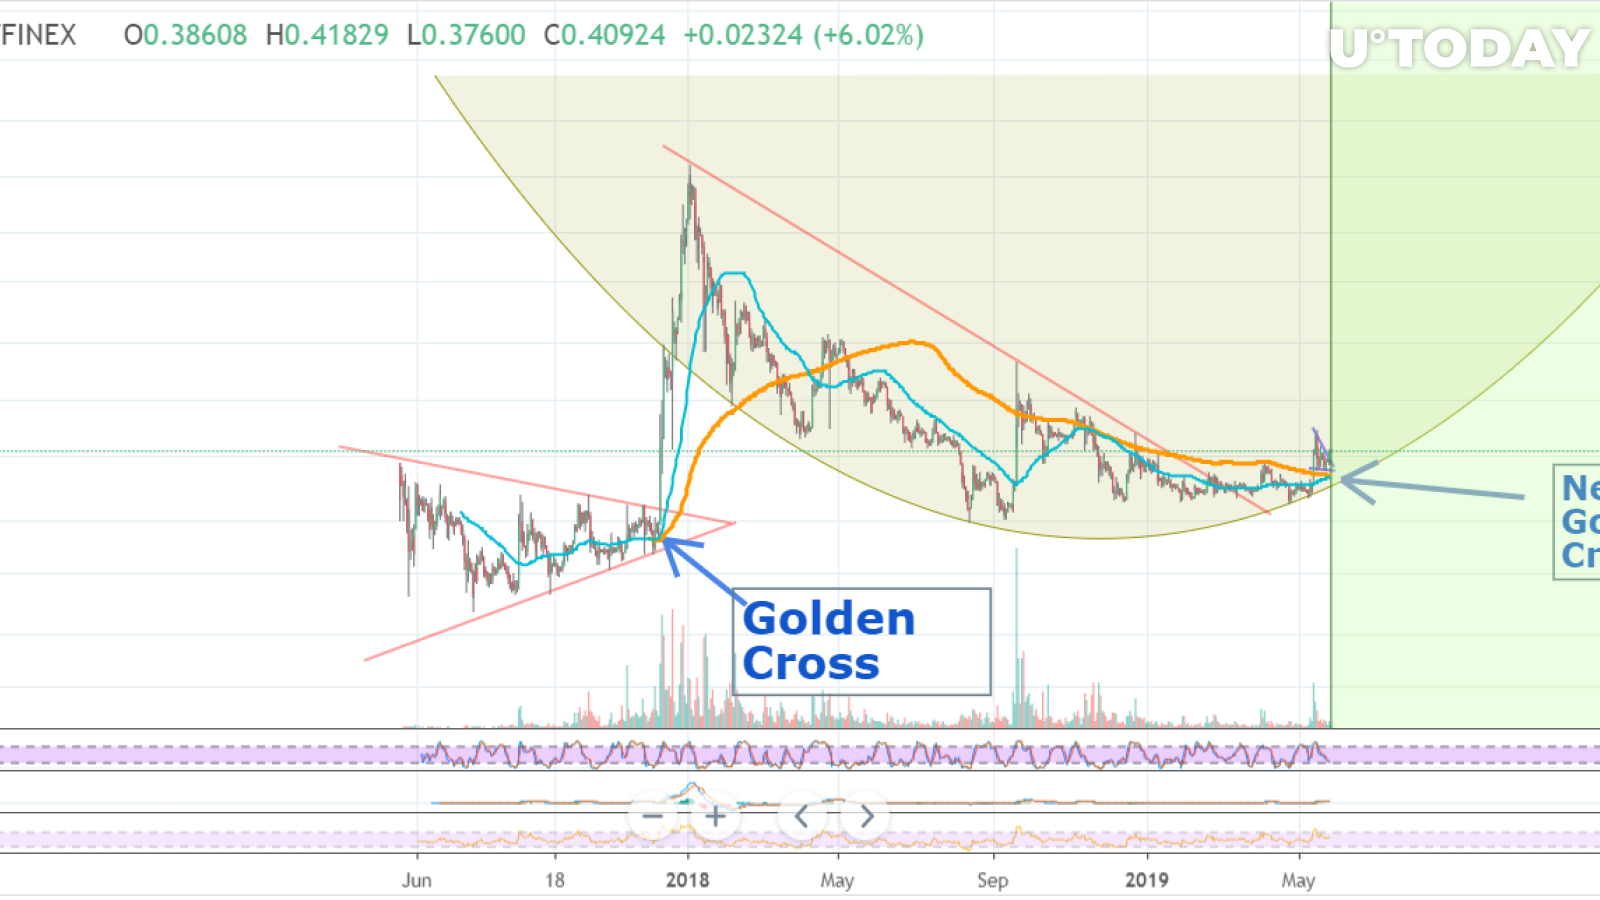 XRP is approaching the new golden cross